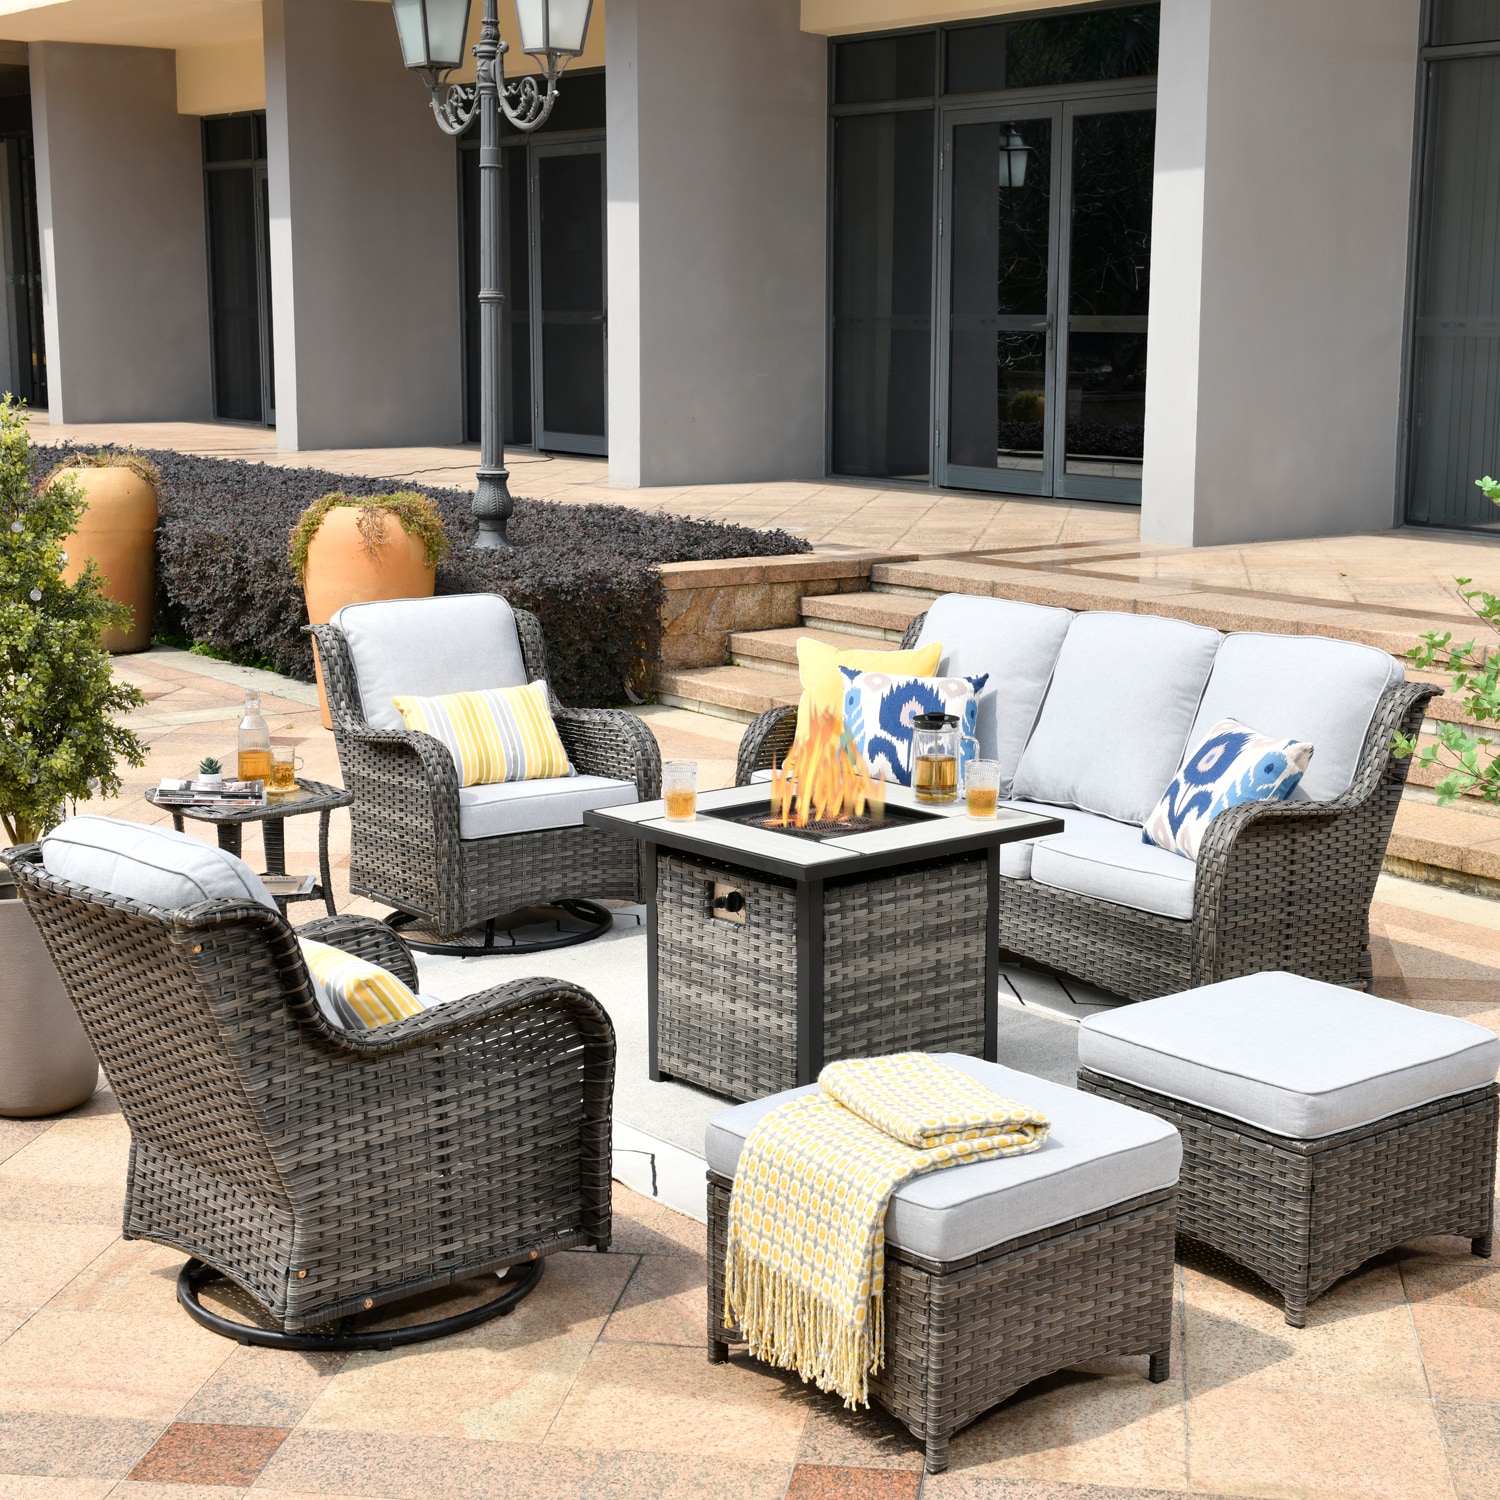 Pouuin 7-Piece Rattan Patio Conversation Set with Olefin Cushions on Sale At Lowe's